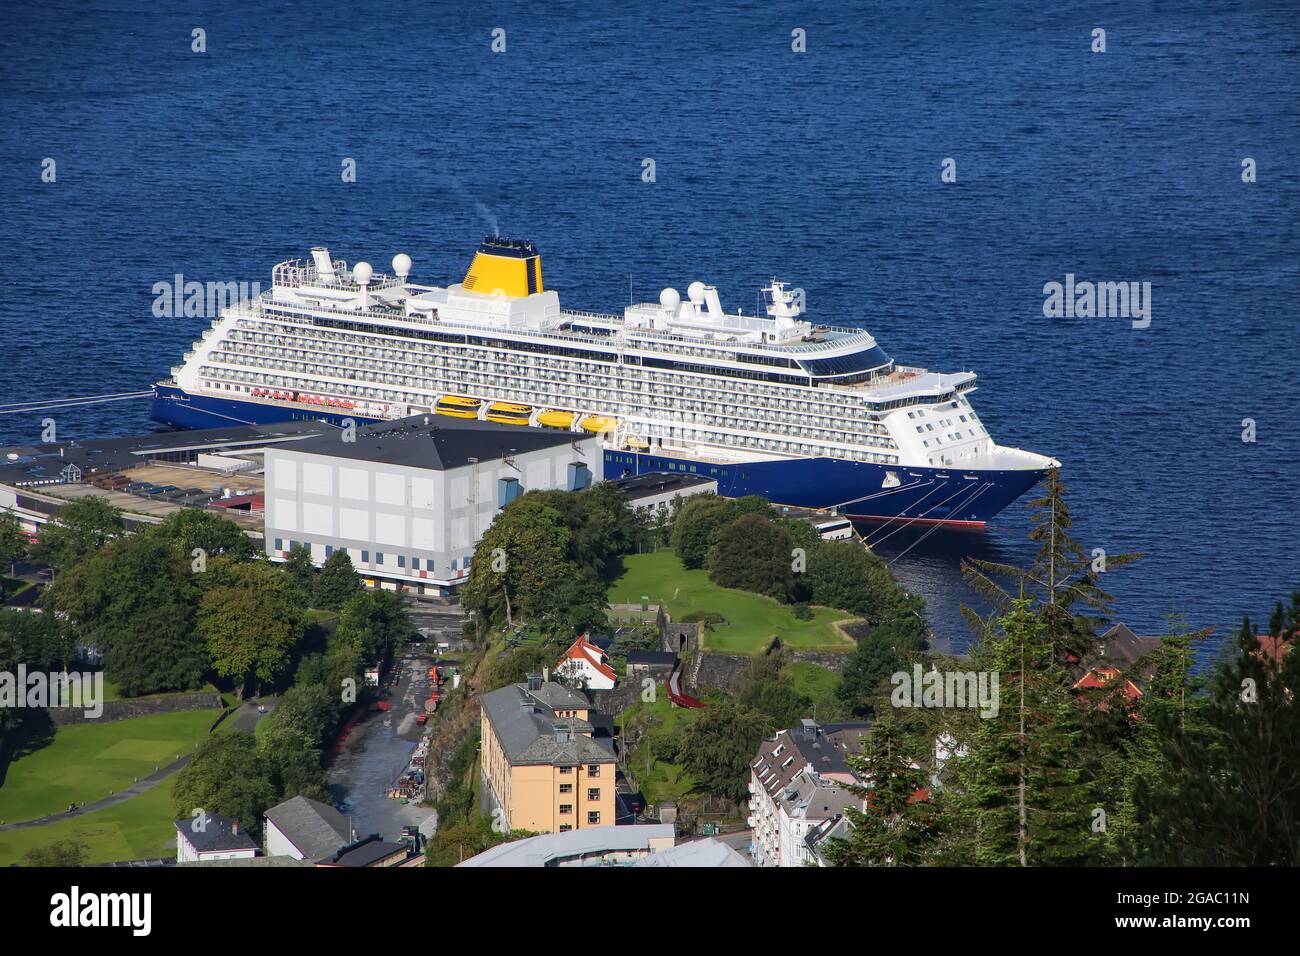 View of a cruise ship with dark blue hull & yellow funnel, docked in the port from the top of the Floibanen funicular and Mount Fløyen, Bergen, Norway. Stock Photo